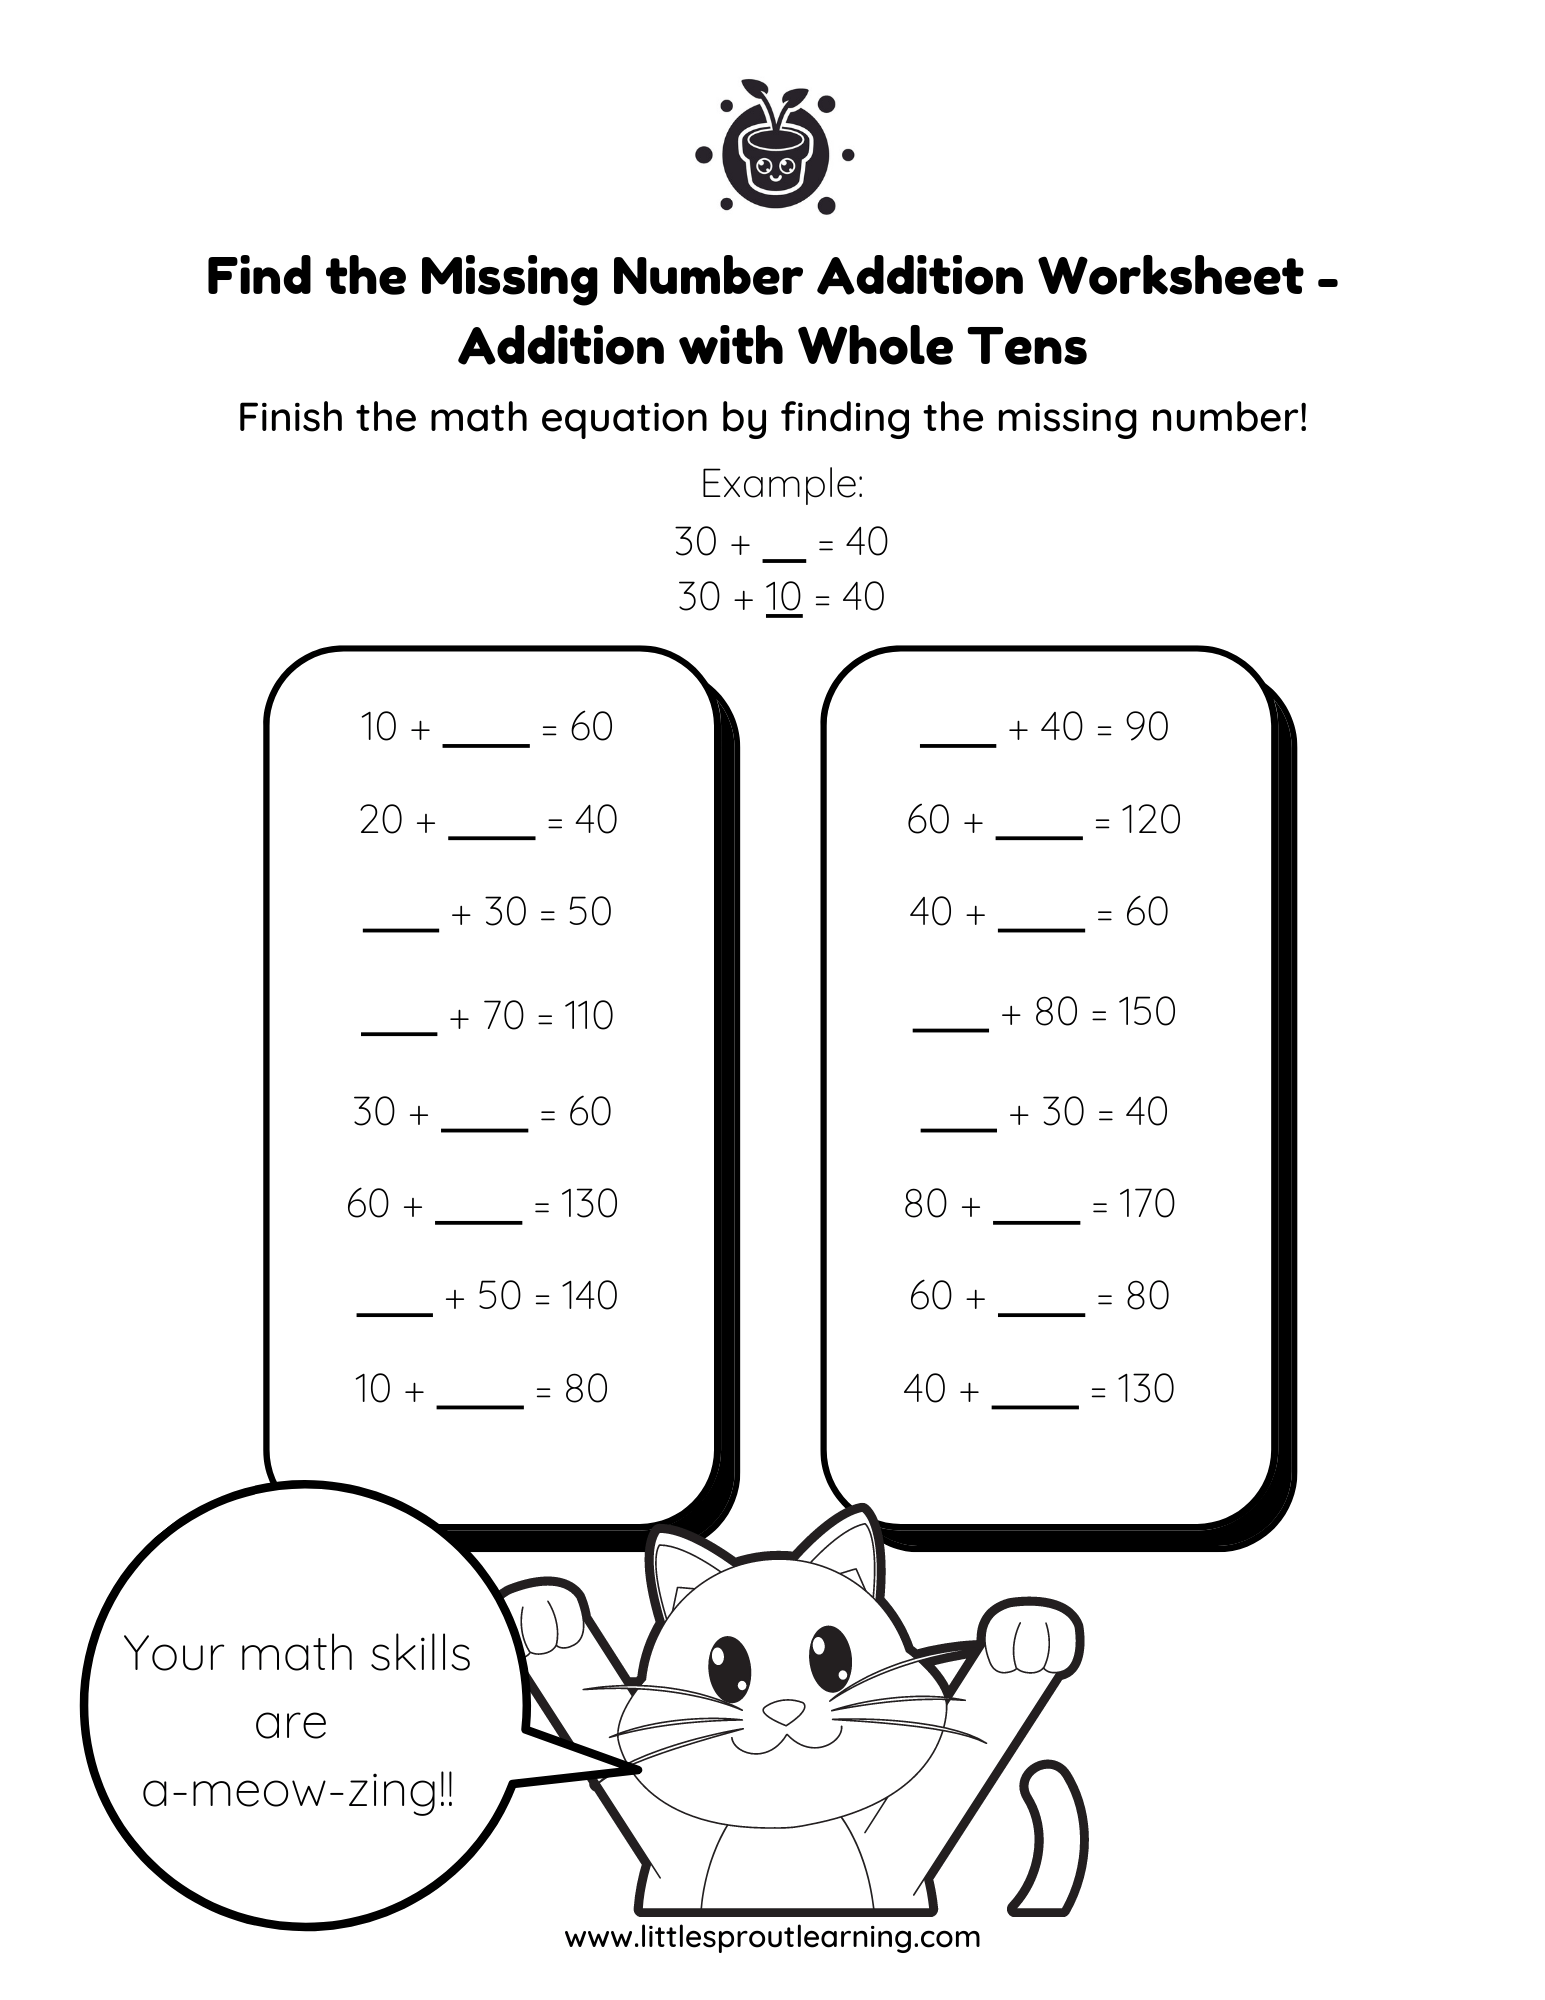 Find the Missing Number Addition Worksheet – Addition With Whole Tens